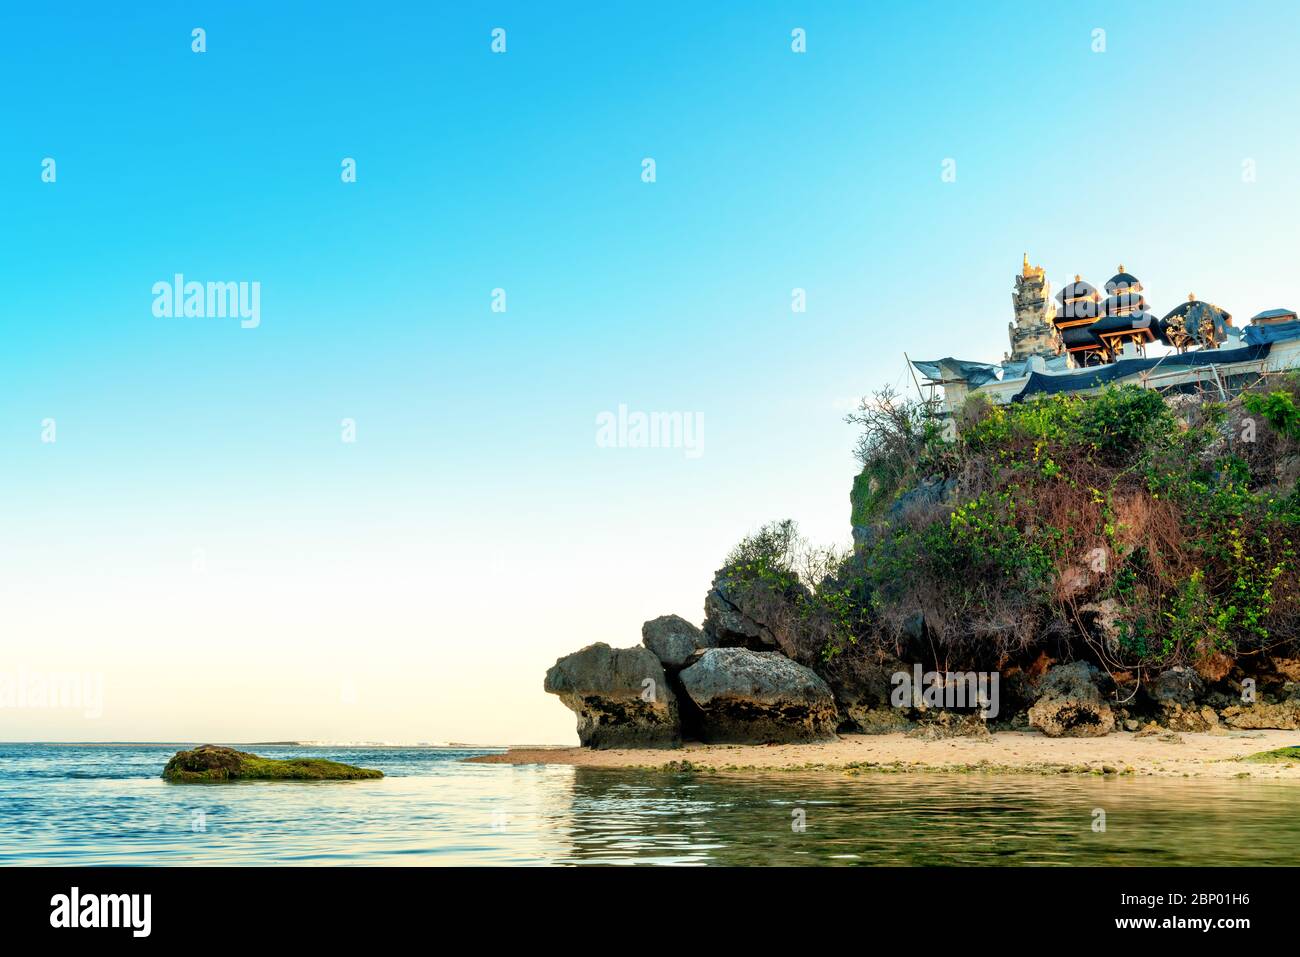 Tanah Lot - Temple in the Ocean. Bali, Indonesia. Stock Photo